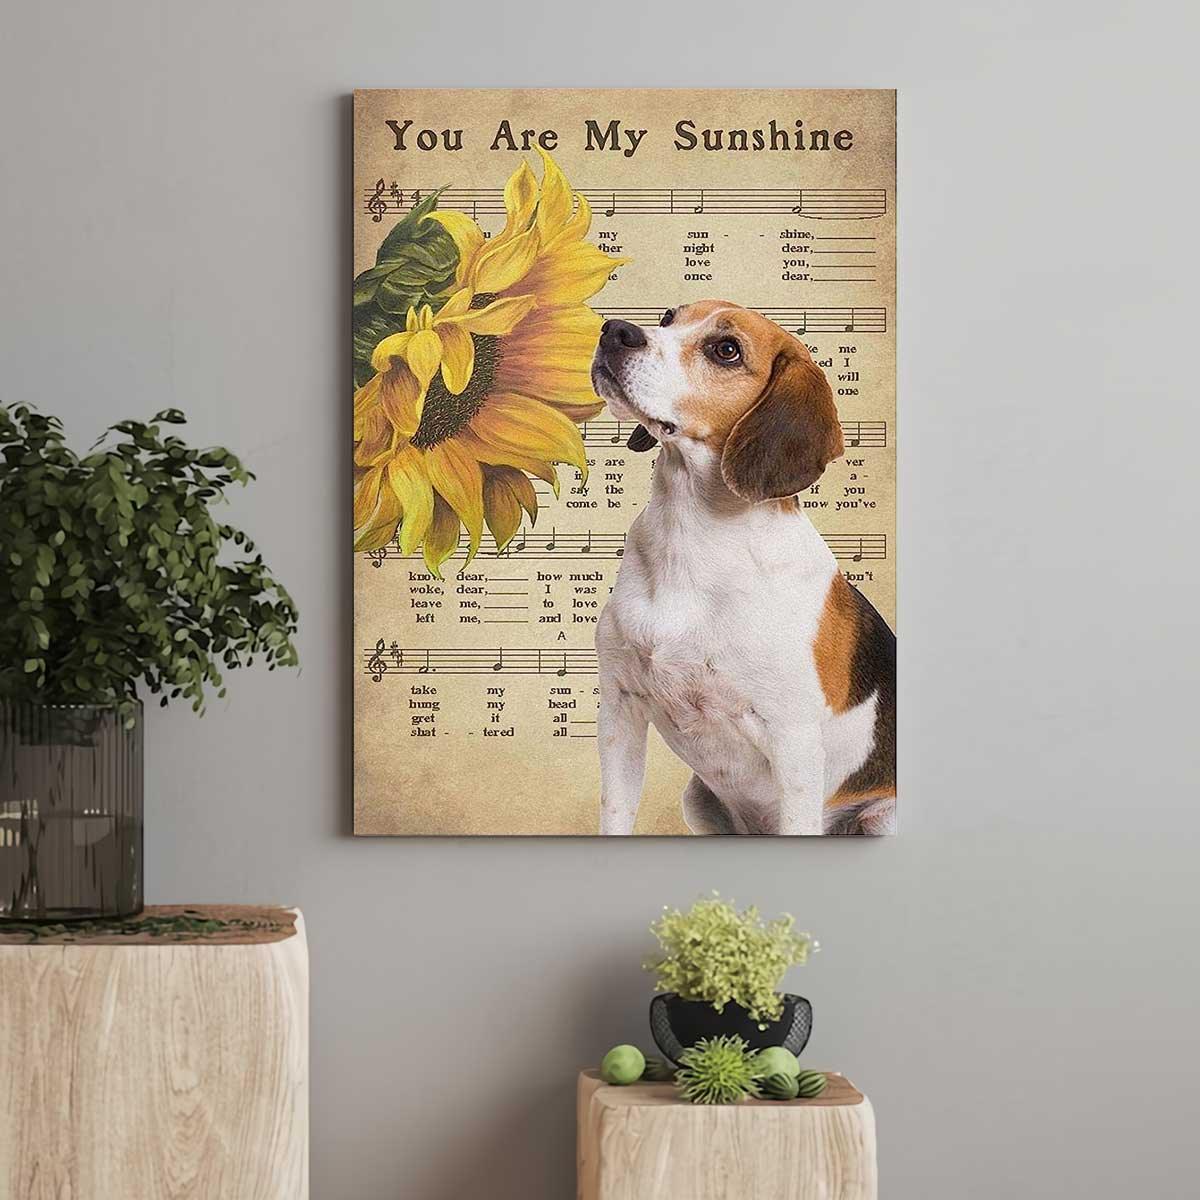 Beagle Portrait Canvas, Beagle You Are My Shunshine - Matte Canvas, Premium Wrapped Canvas - Perfect Gift For Beagle Dog Owner, Dog Lovers - Amzanimalsgift